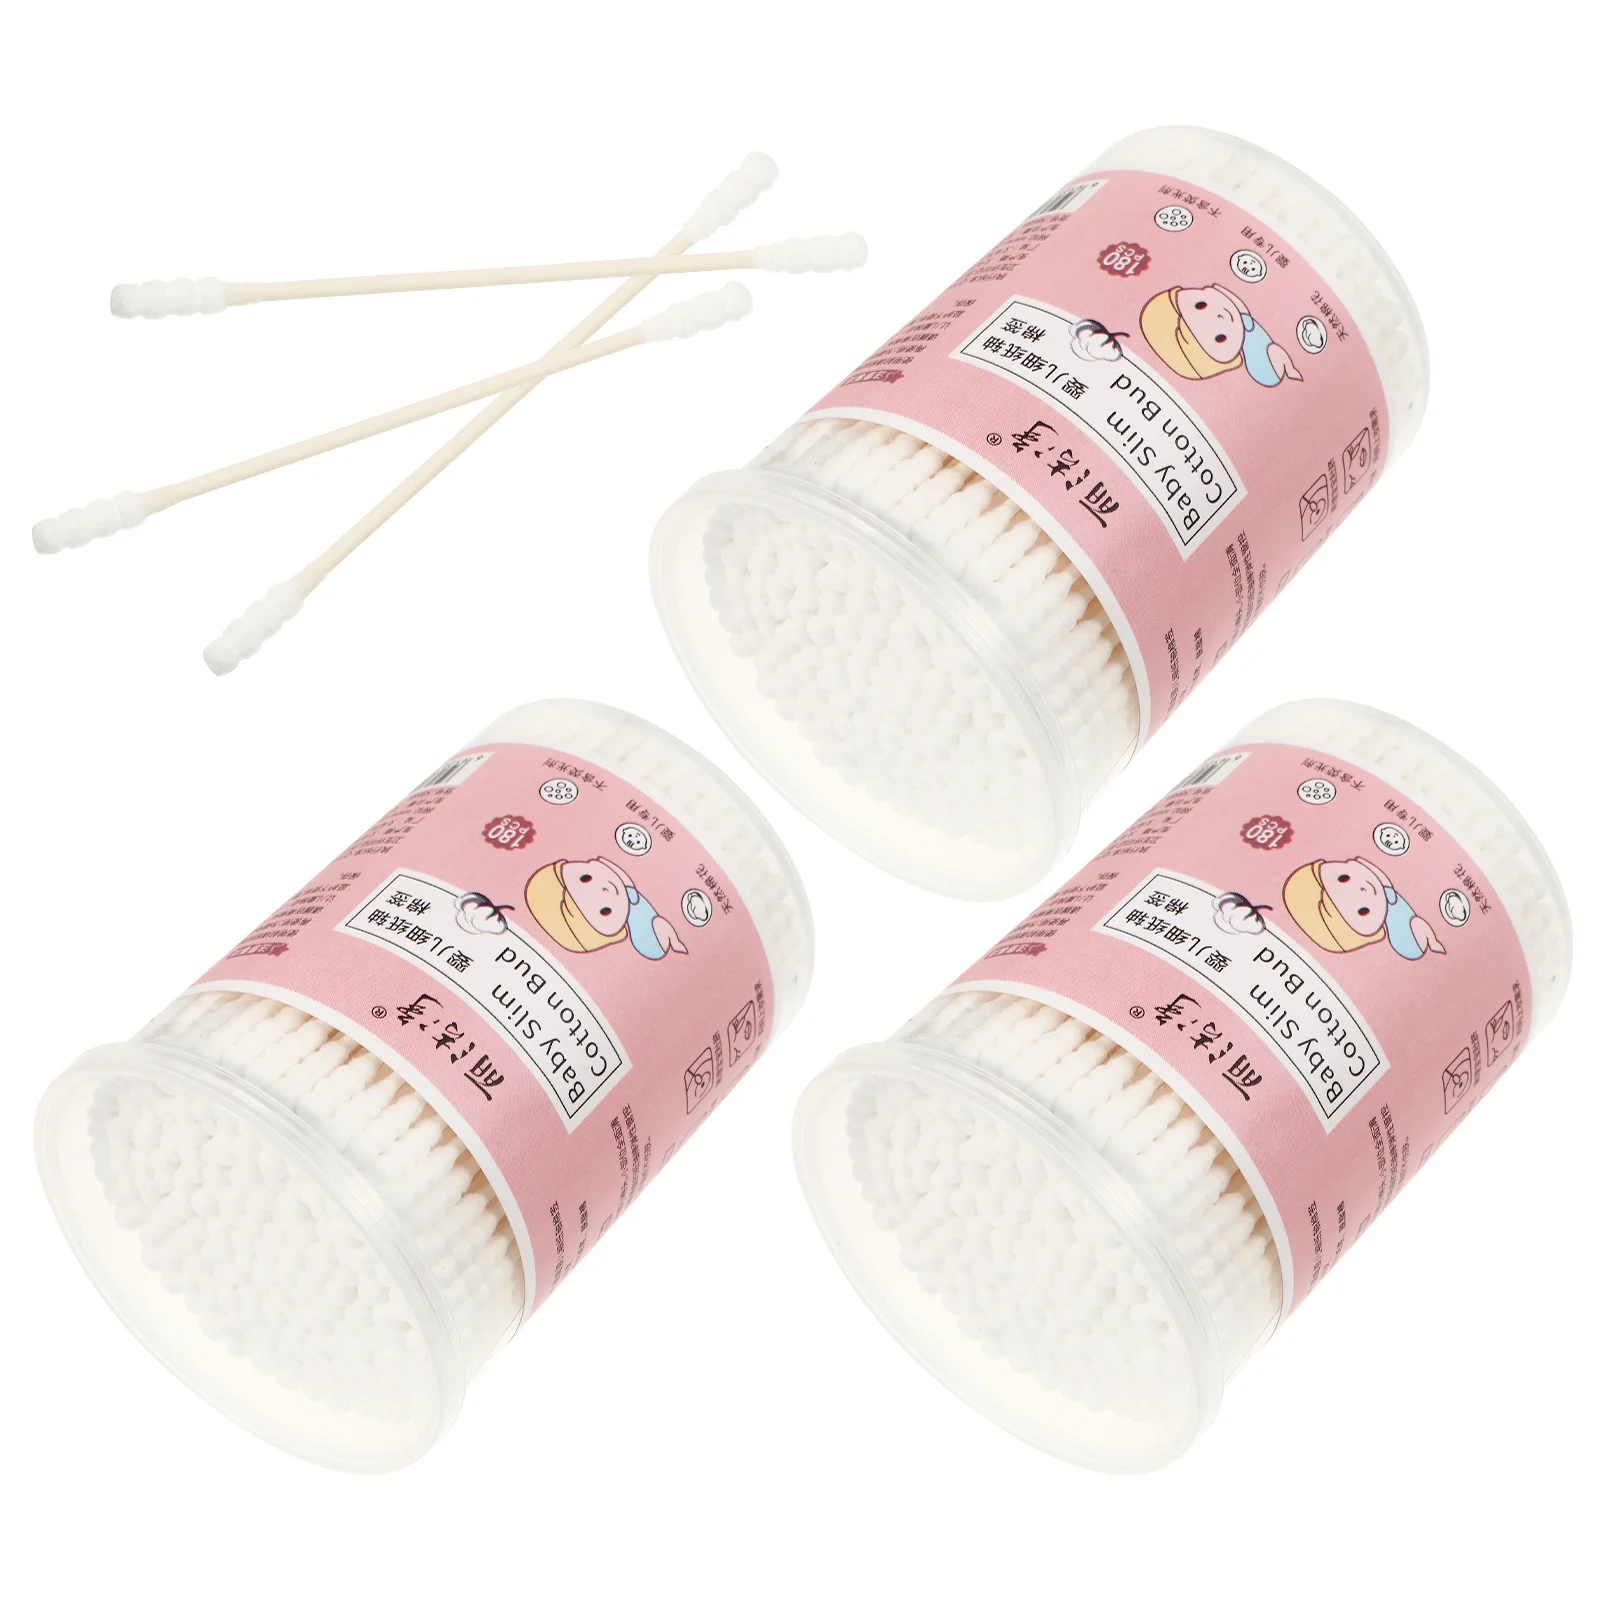 

3 Boxes Cotton Swab Swabs Disposable Safety Buds Ear Cleaning Sticks Makeup White Absorbent Double-headed Kids Child